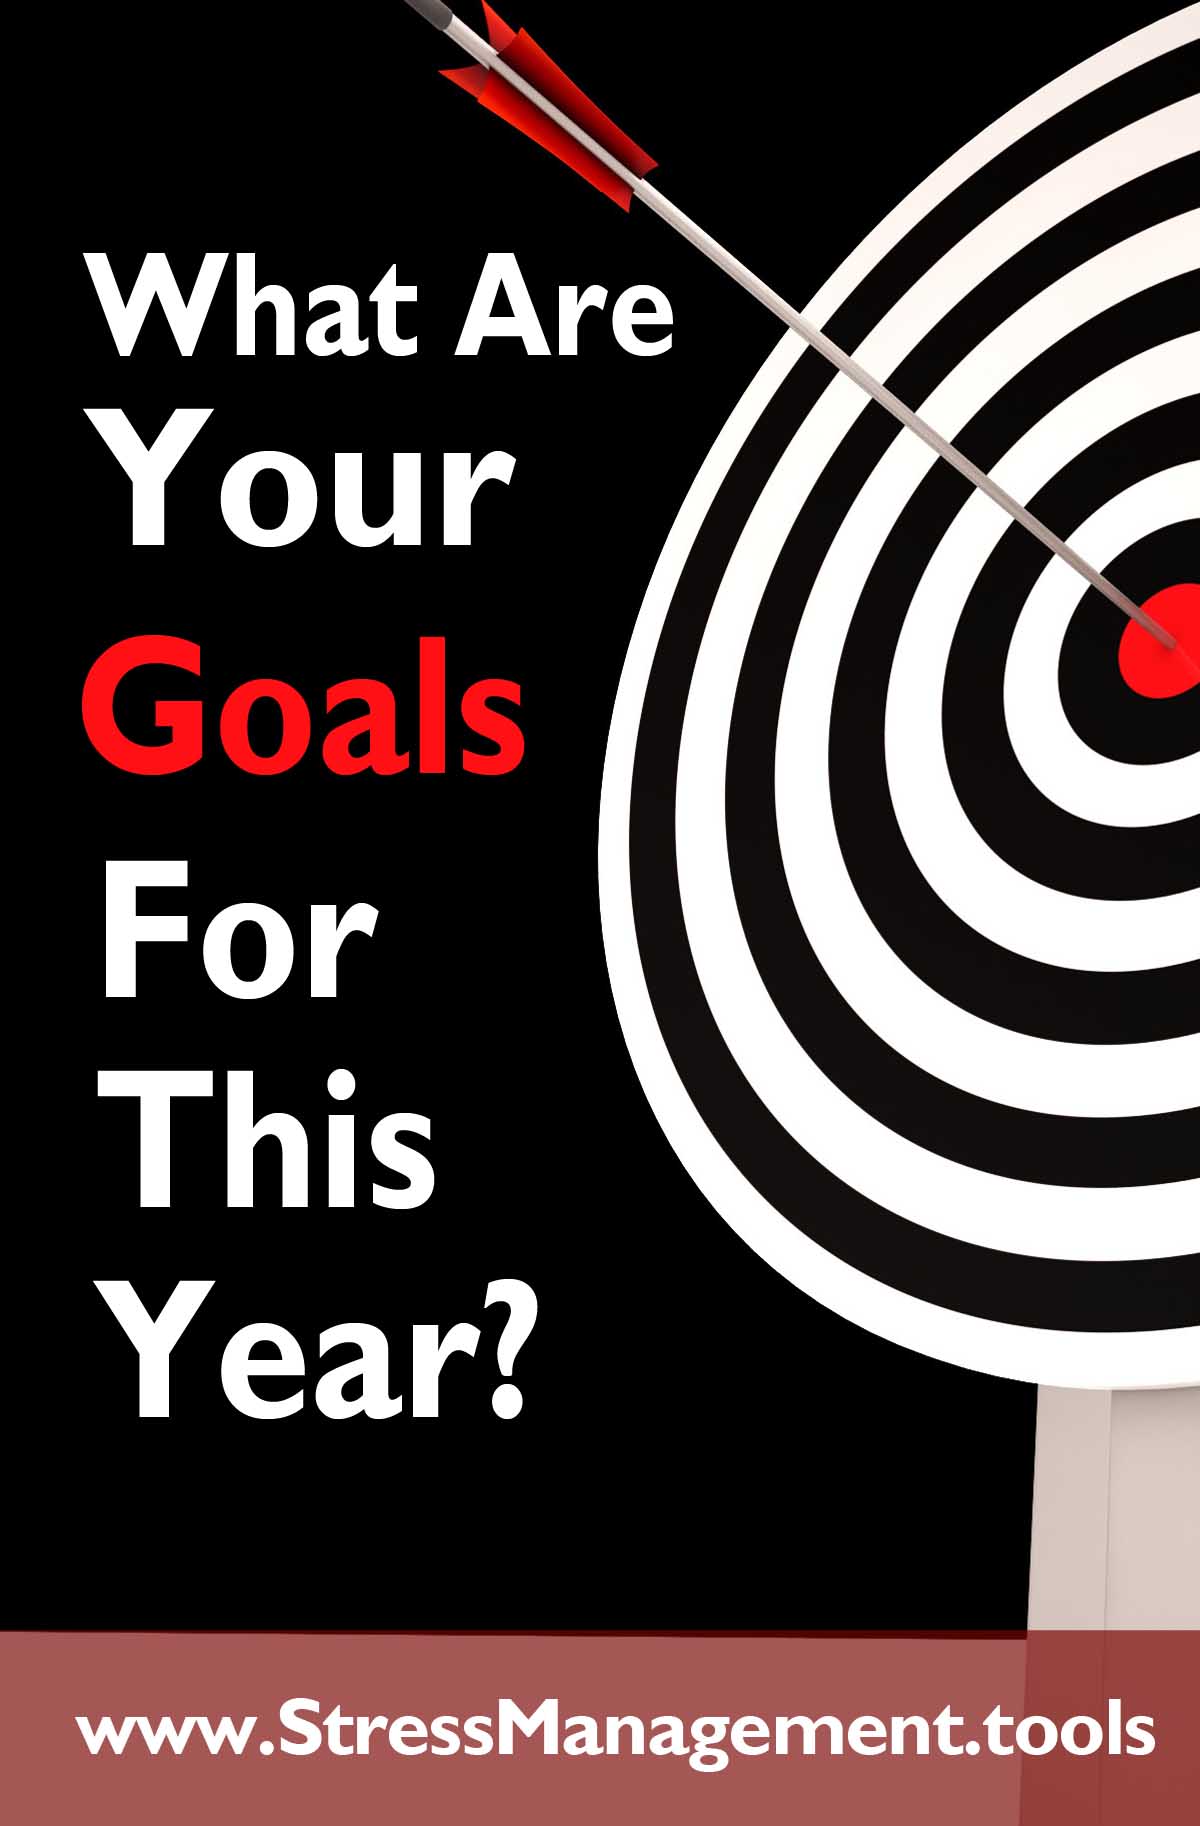 What Are Your Goals For This Year?